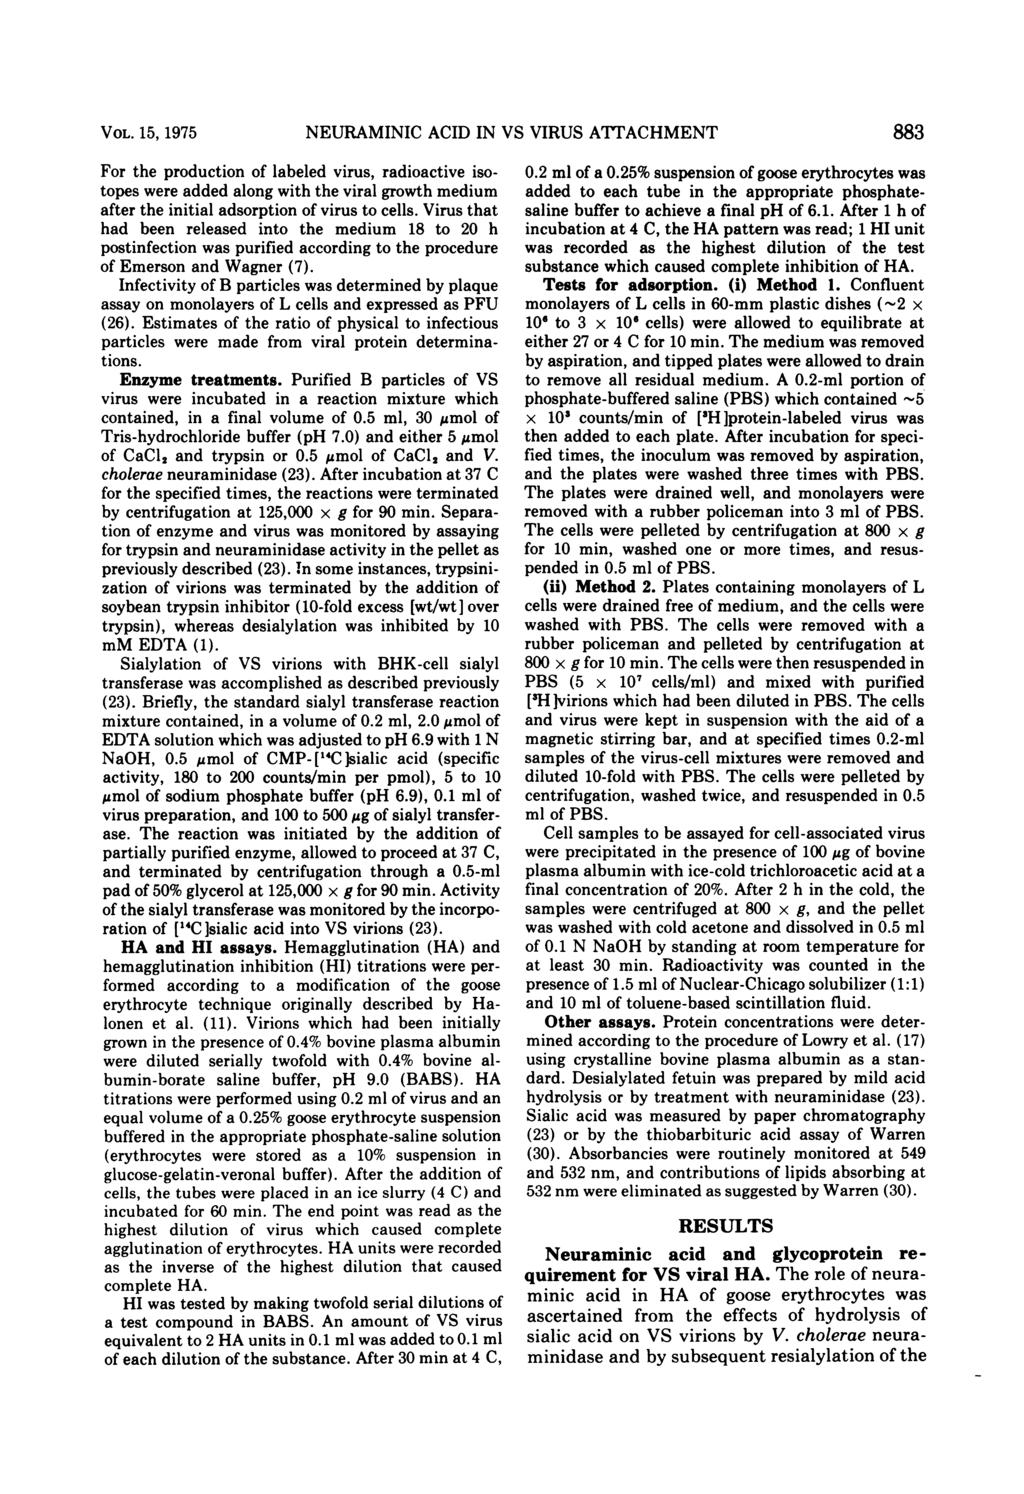 VOL. 15, 1975 For the production of labeled virus, radioactive isotopes were added along with the viral growth medium after the initial adsorption of virus to cells.